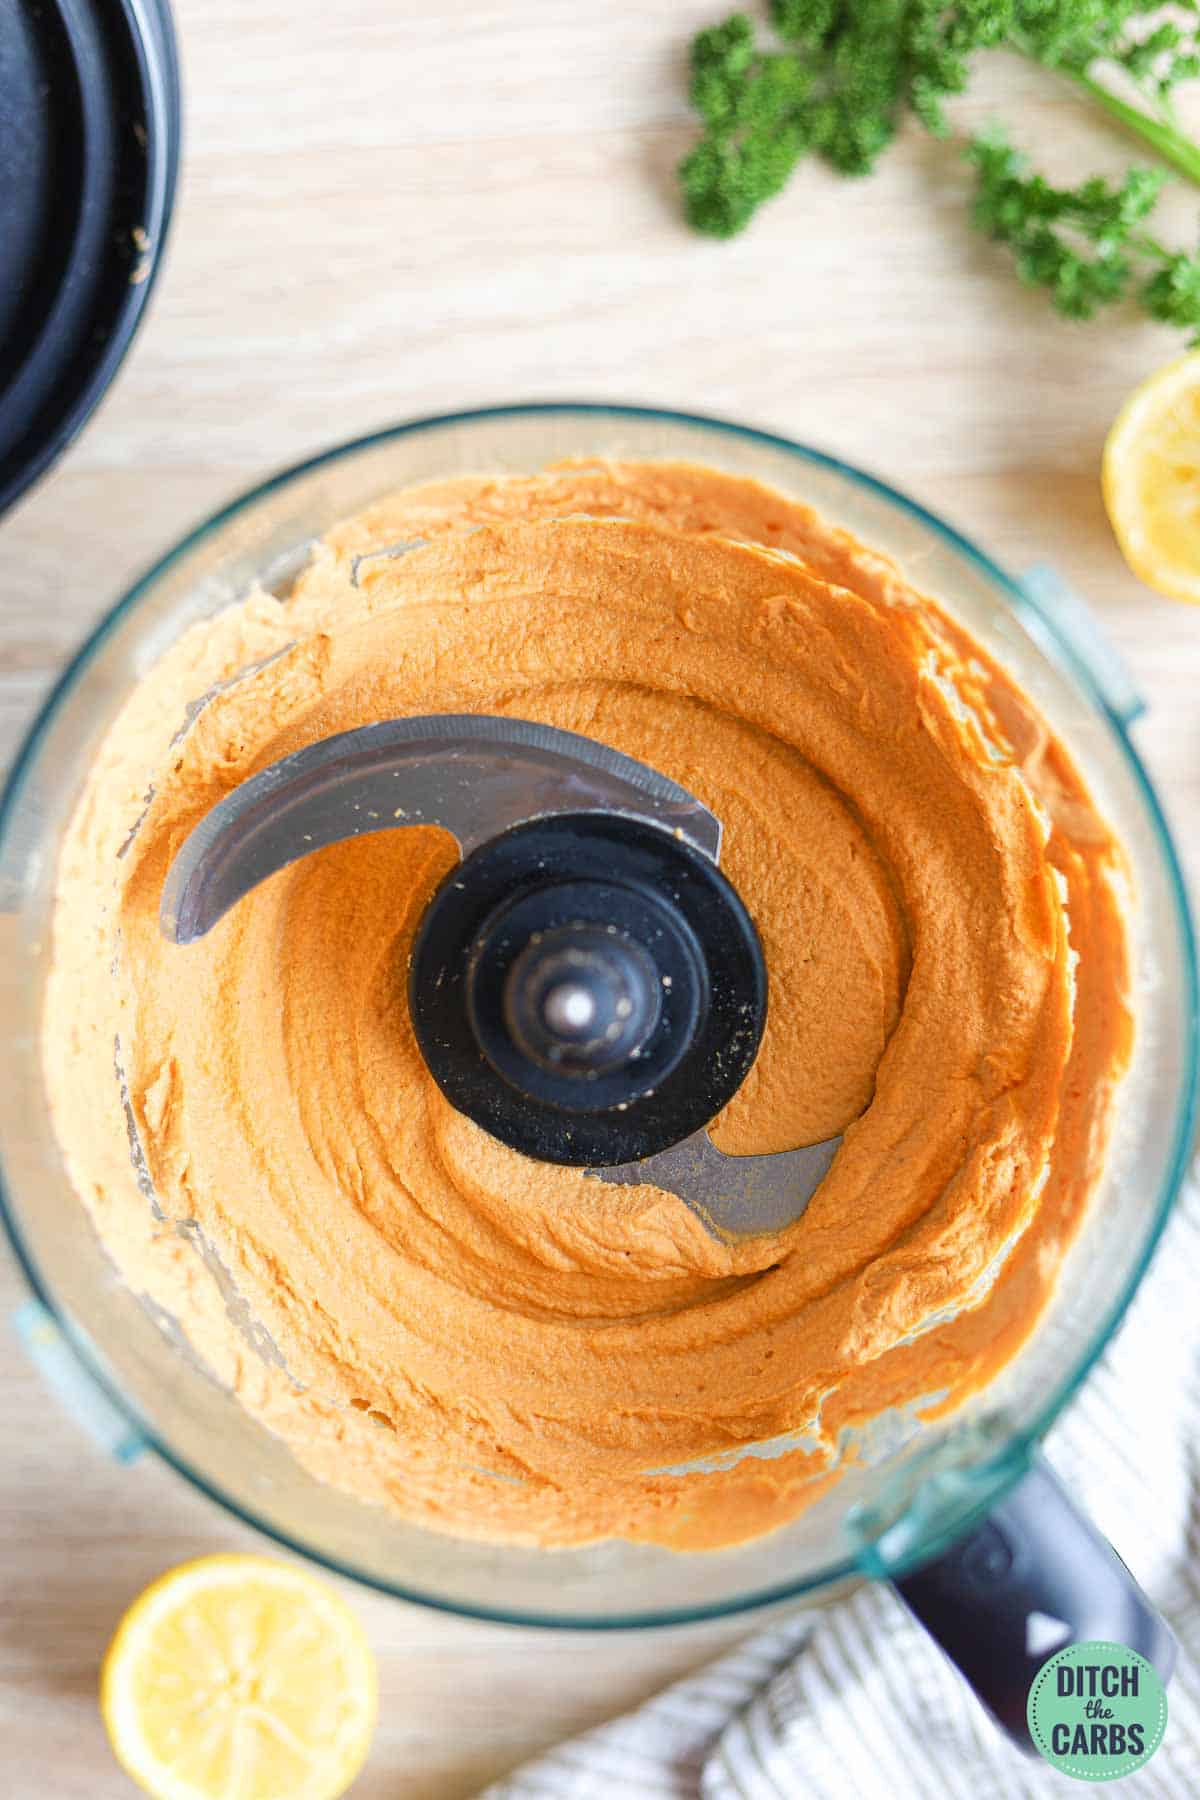 Smooth and creamy low-carb hummus mixed in a food processor.